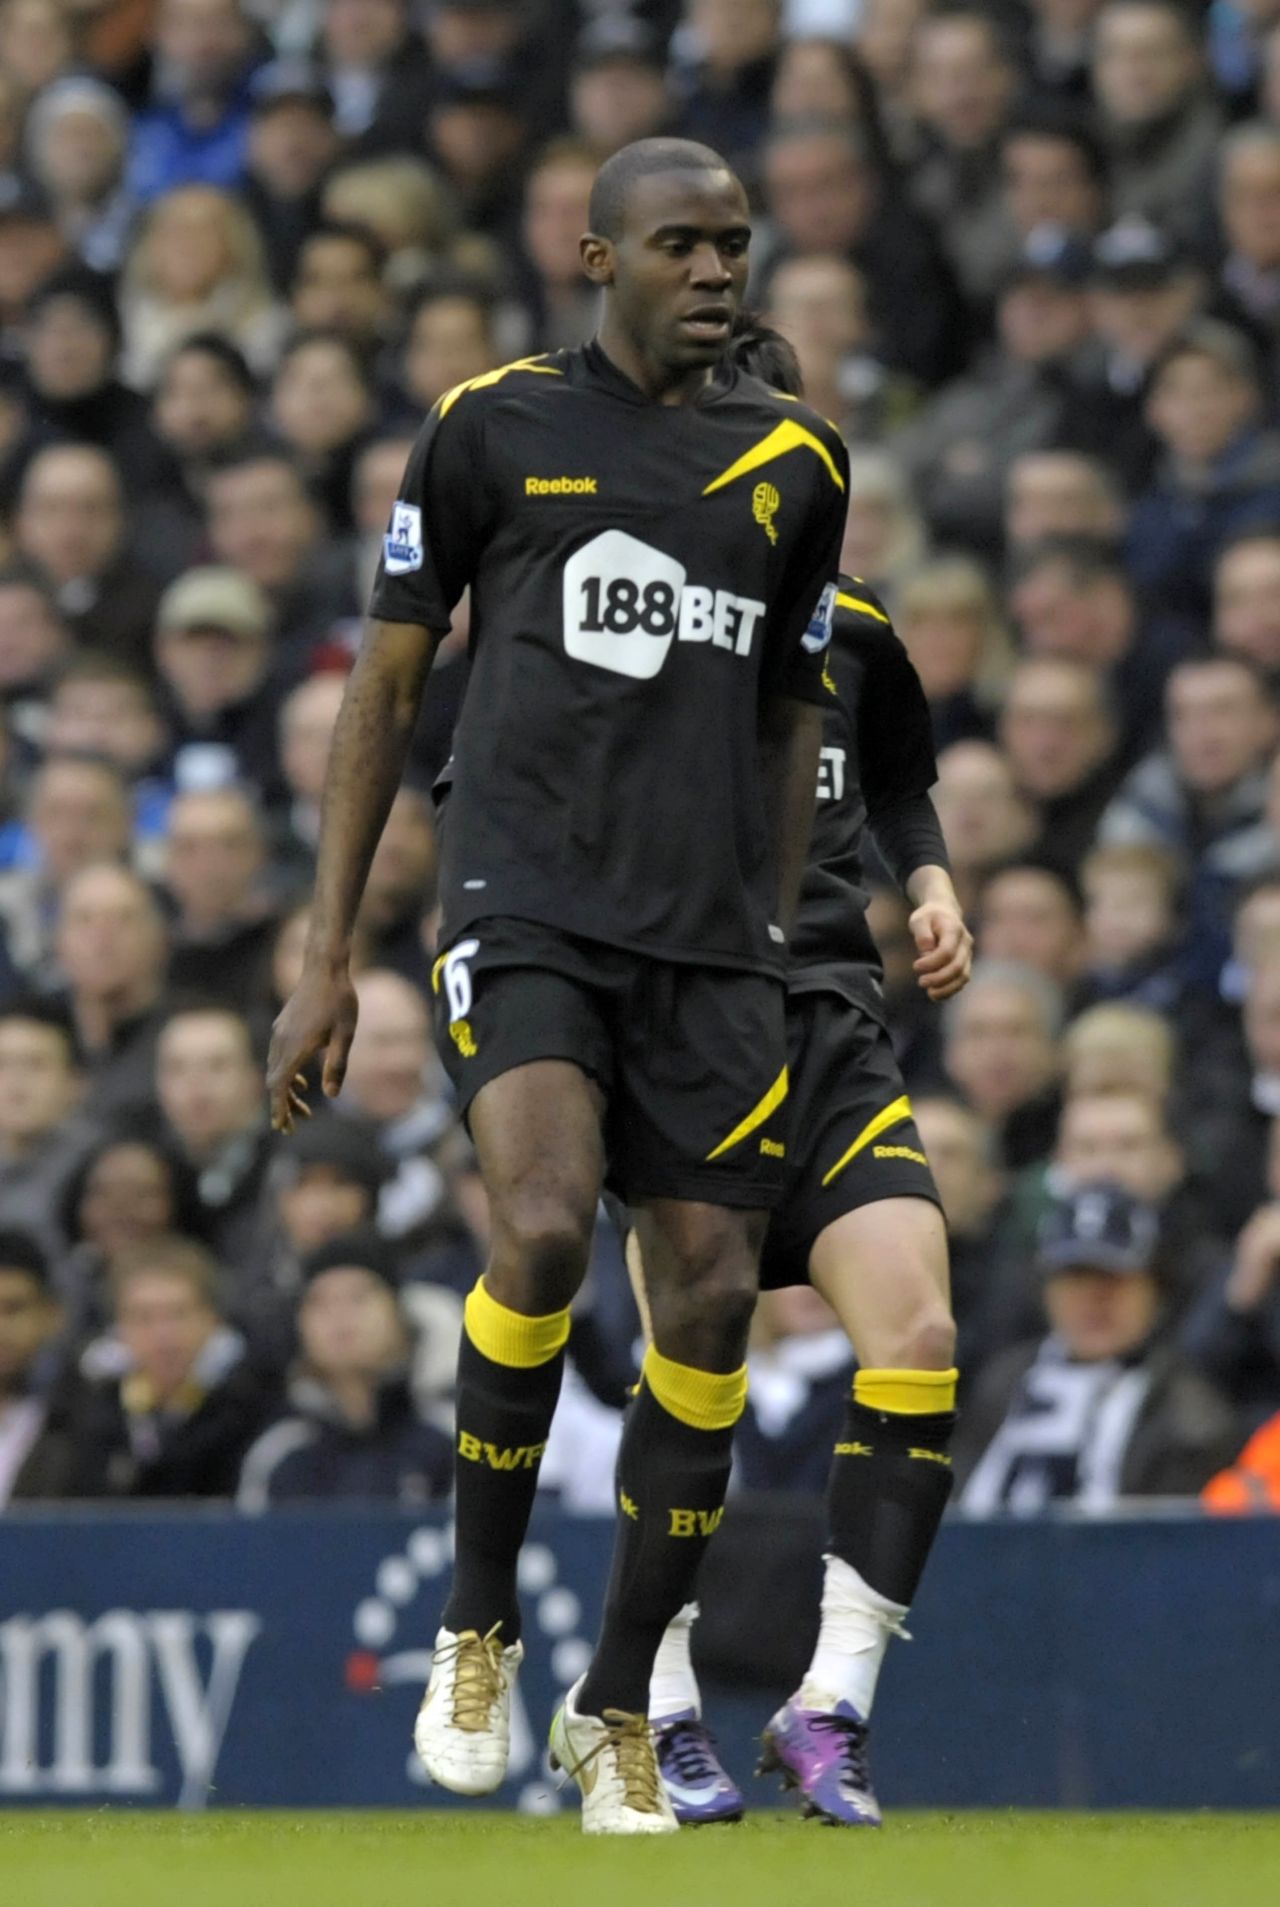 Muamba collapsed on the pitch just before halftime during the English FA Cup quarterfinal at Tottenham Hotspur on March 17, suffering a cardiac arrest before being brought back to life.